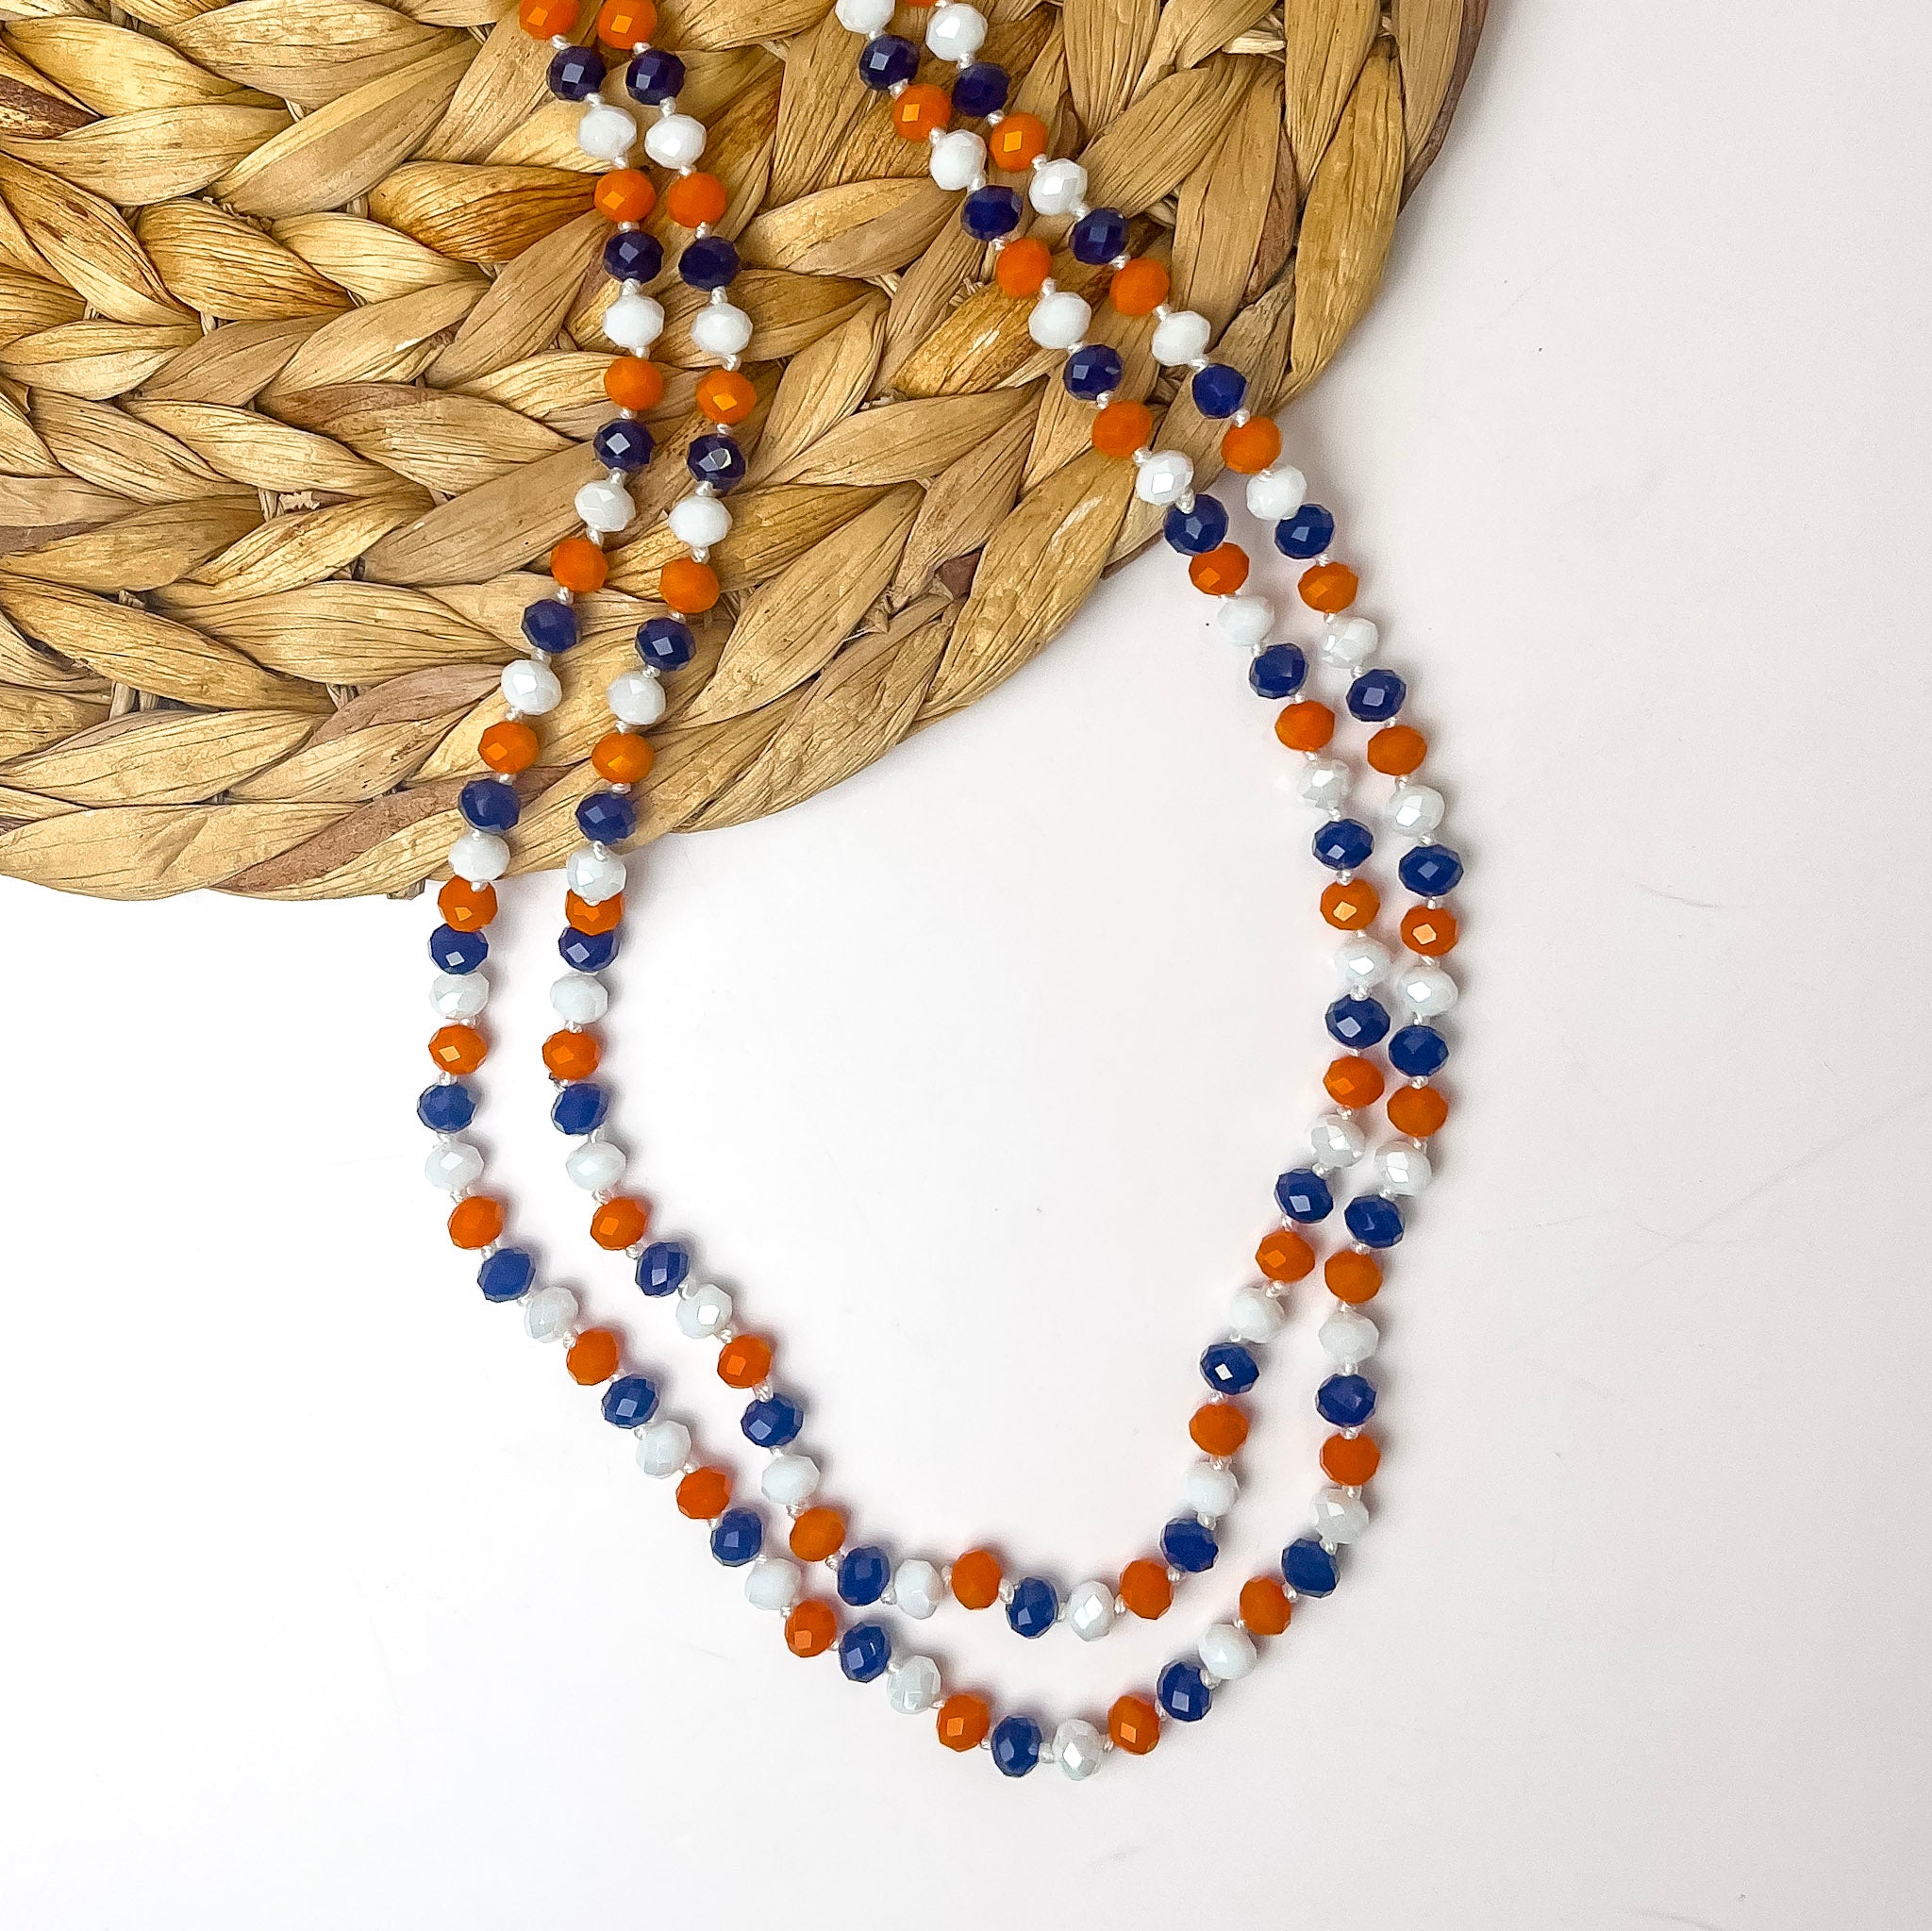 60 Inch Long Layering 8mm Crystal Strand Necklace in Orange, Blue, and White - Giddy Up Glamour Boutique